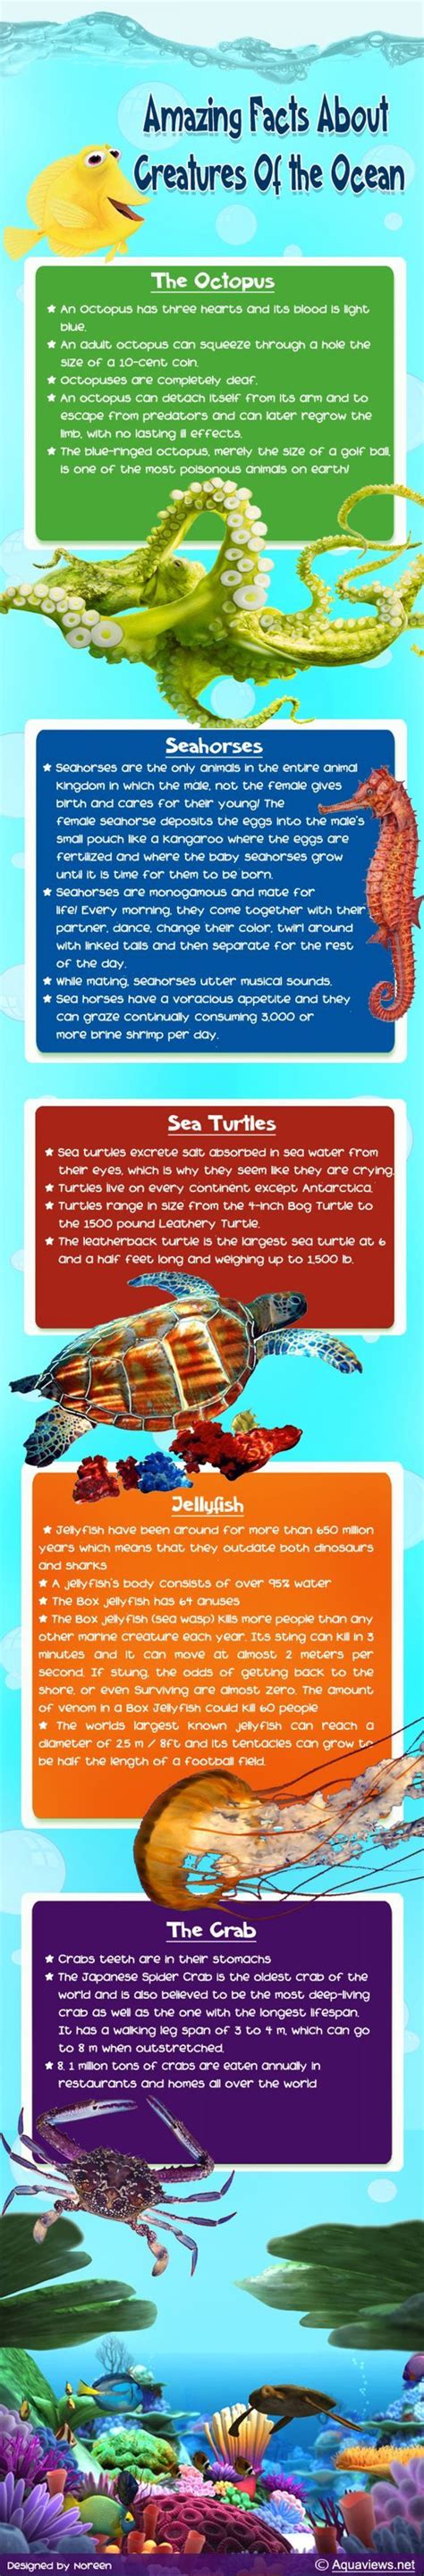 Facts About Animals In The Ocean